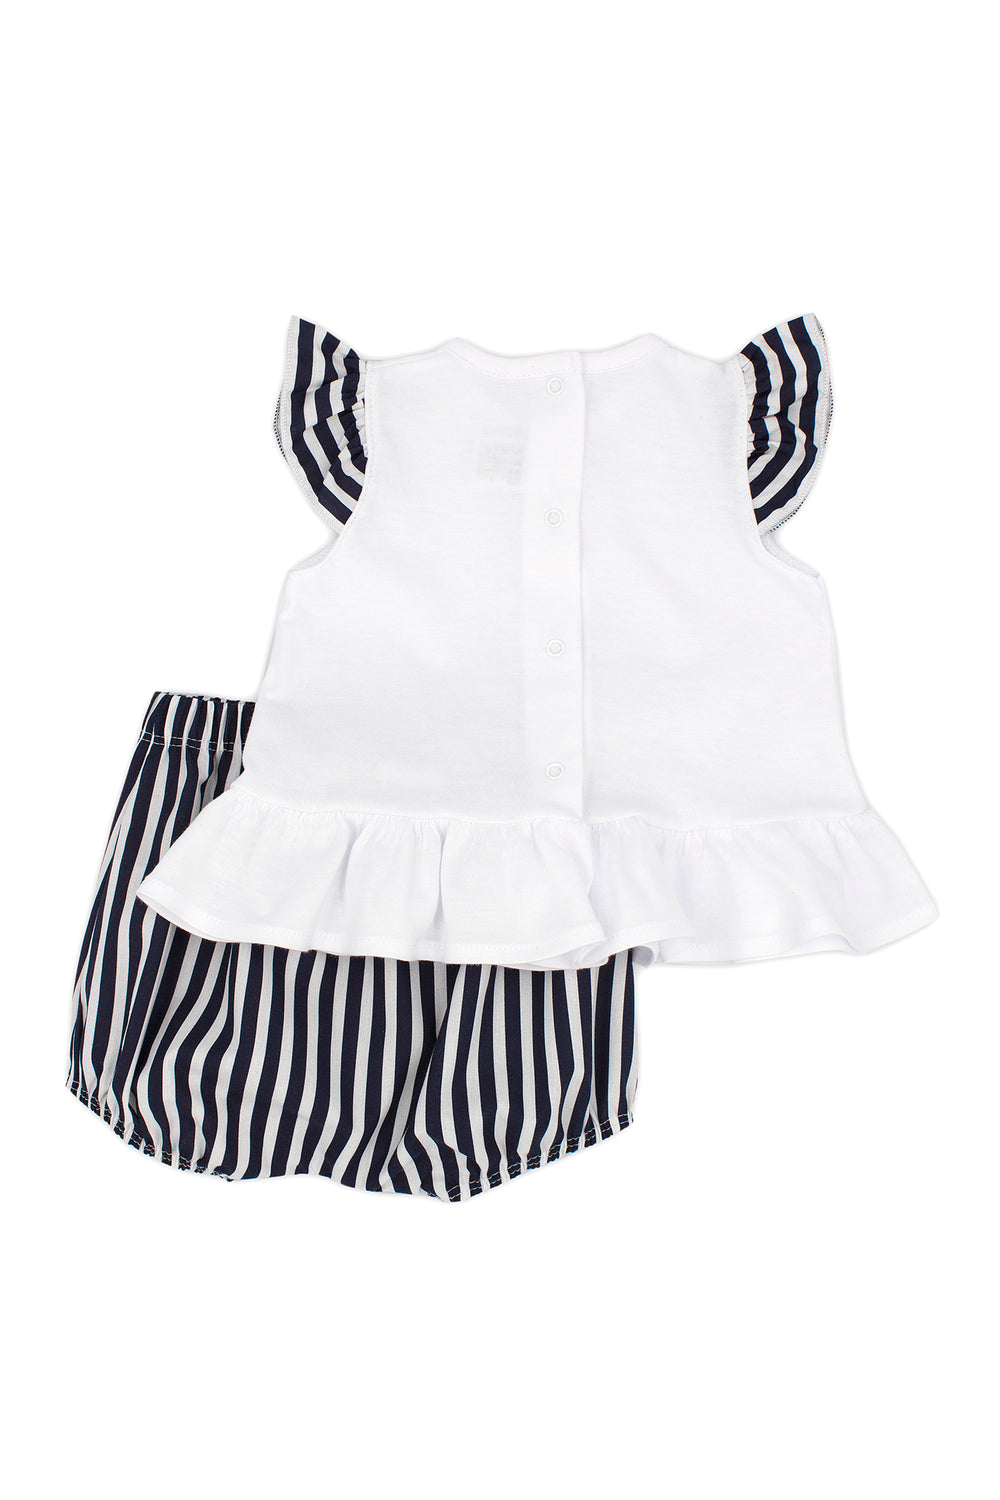 Rapife "Oriana" Black Striped Top & Bloomers | Millie and John